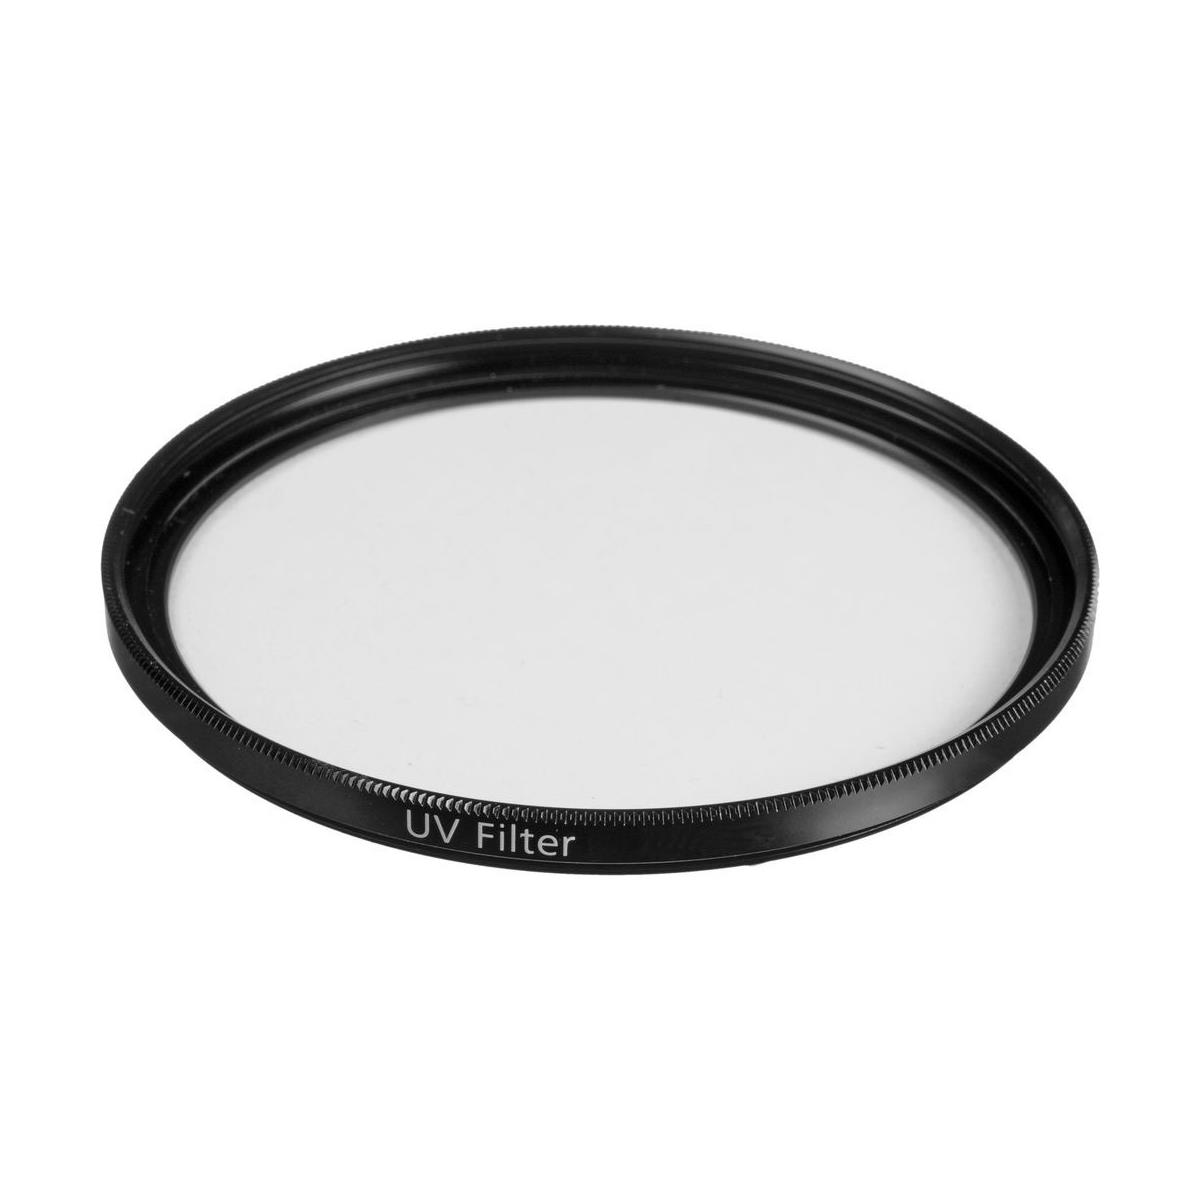 Zeiss 62mm T* Coated UV Filter